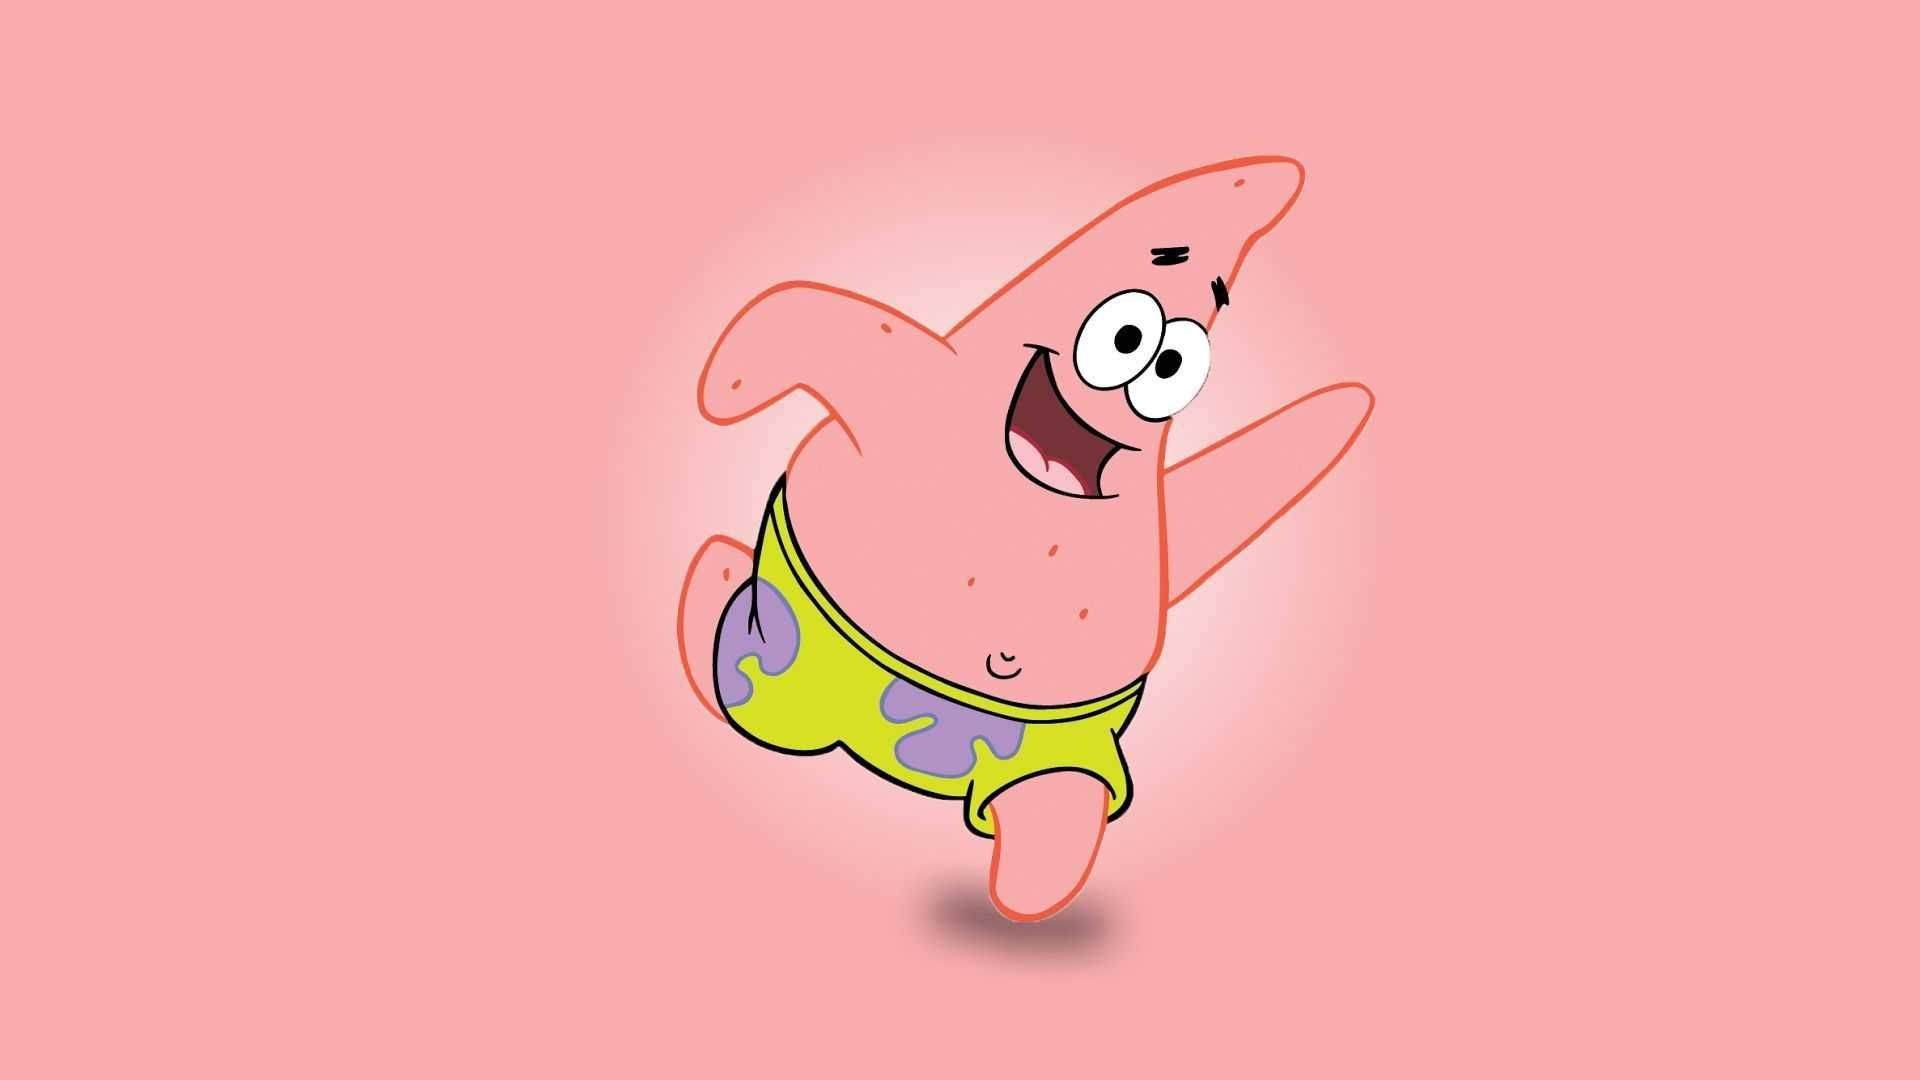 "Have You Seen Patrick Star?" Wallpaper